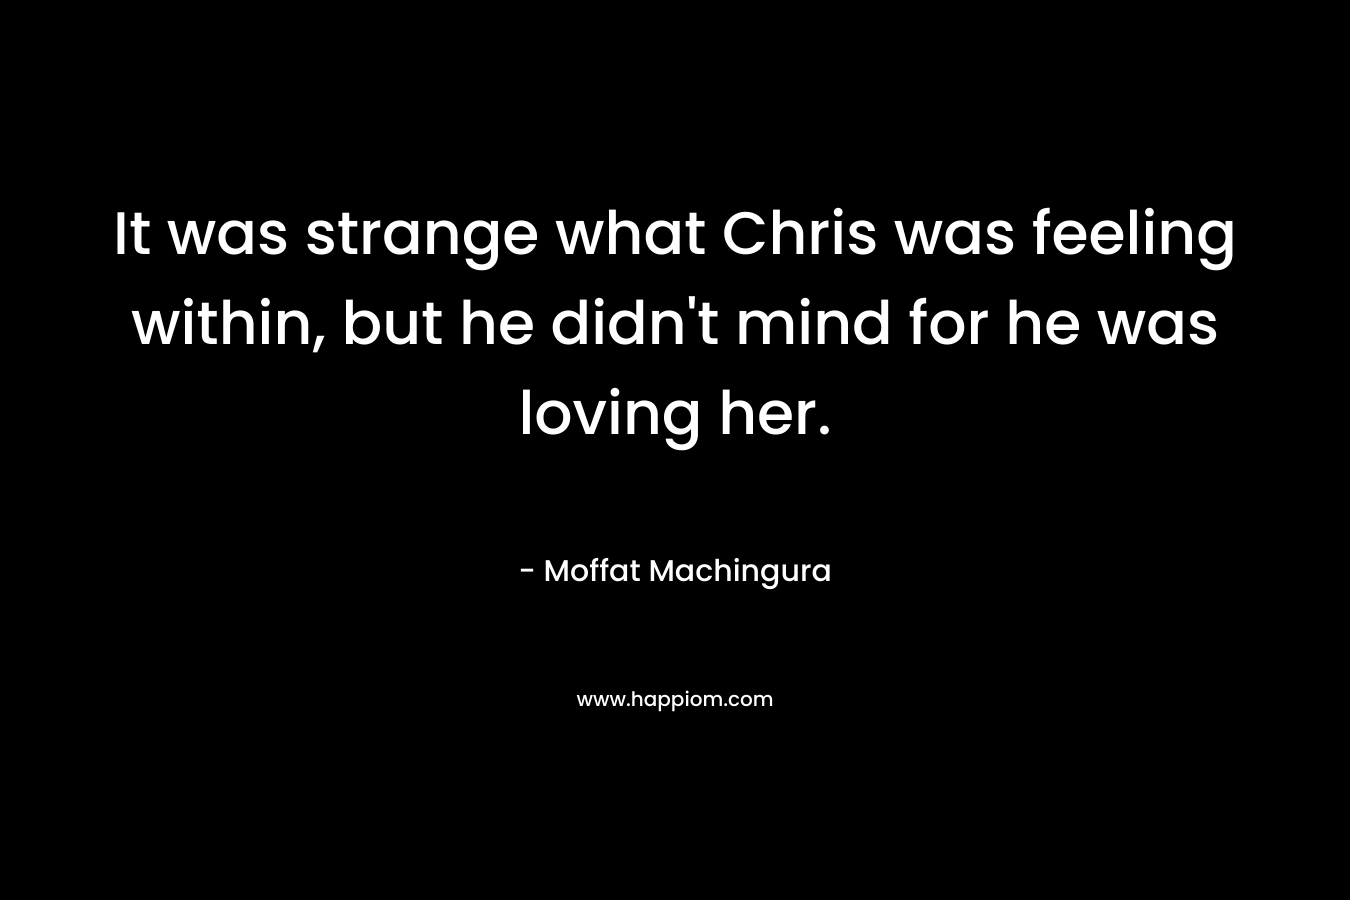 It was strange what Chris was feeling within, but he didn’t mind for he was loving her. – Moffat Machingura